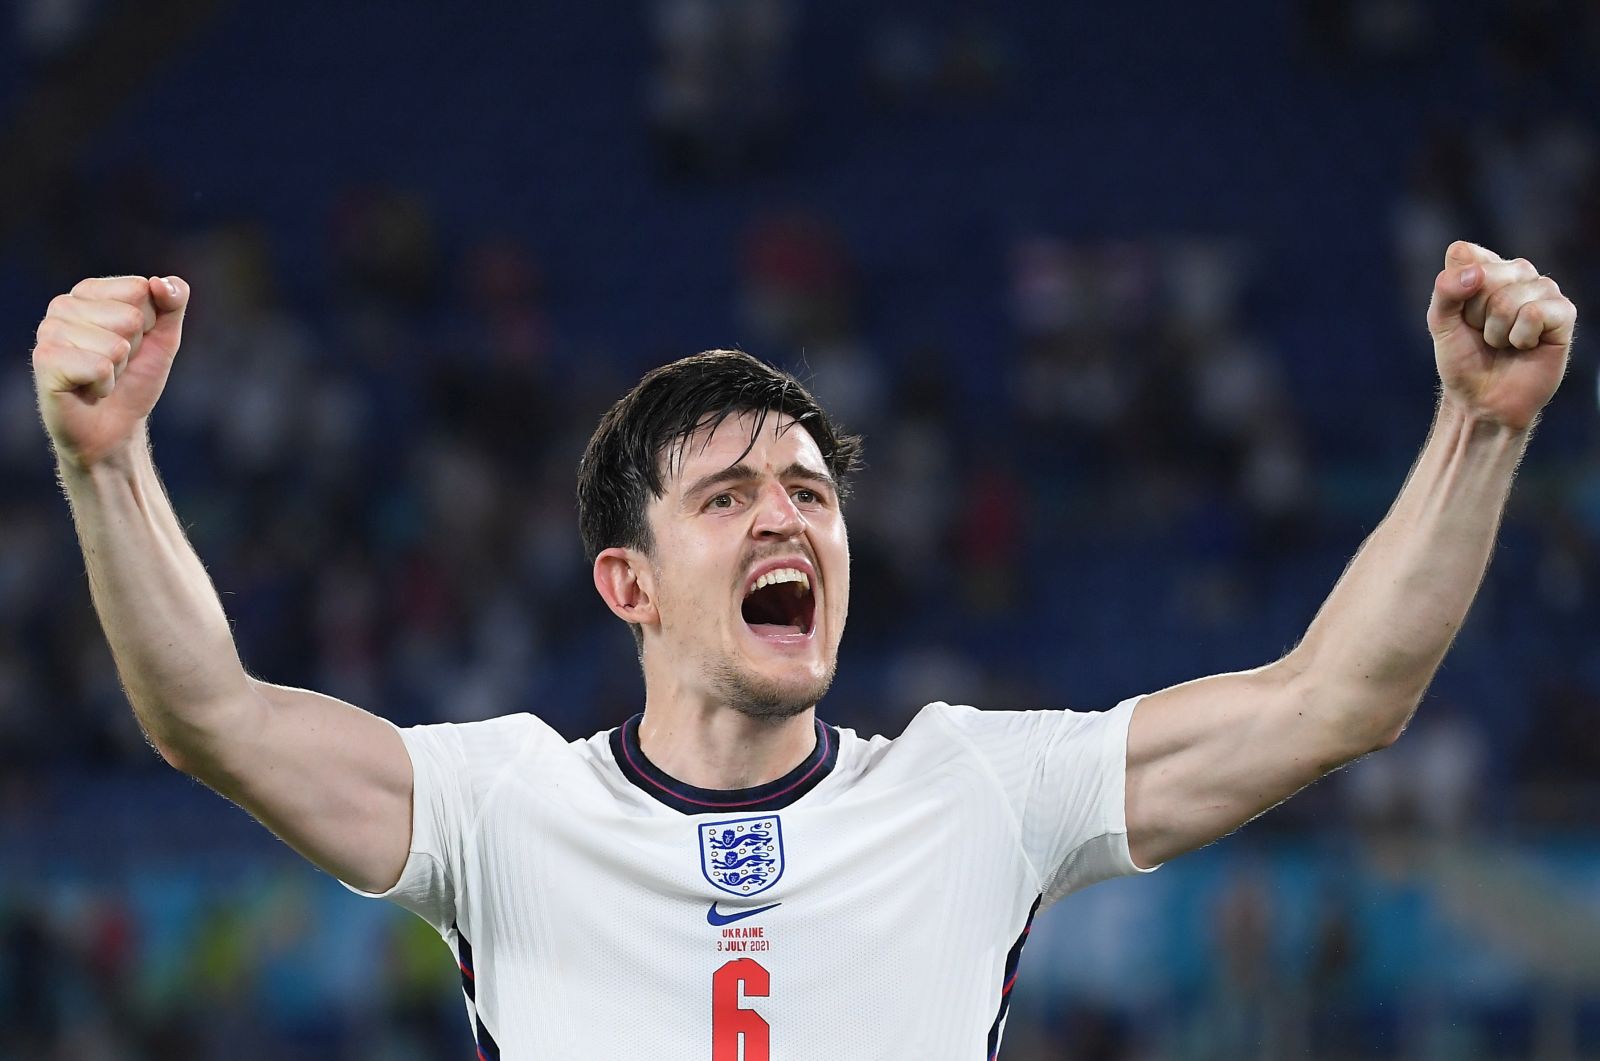 epa09321503 Harry Maguire of England celebrates after winning the UEFA EURO 2020 quarter final match between Ukraine and England in Rome, Italy, 03 July 2021.  EPA/Ettore Ferrari / POOL (RESTRICTIONS: For editorial news reporting purposes only. Images must appear as still images and must not emulate match action video footage. Photographs published in online publications shall have an interval of at least 20 seconds between the posting.)